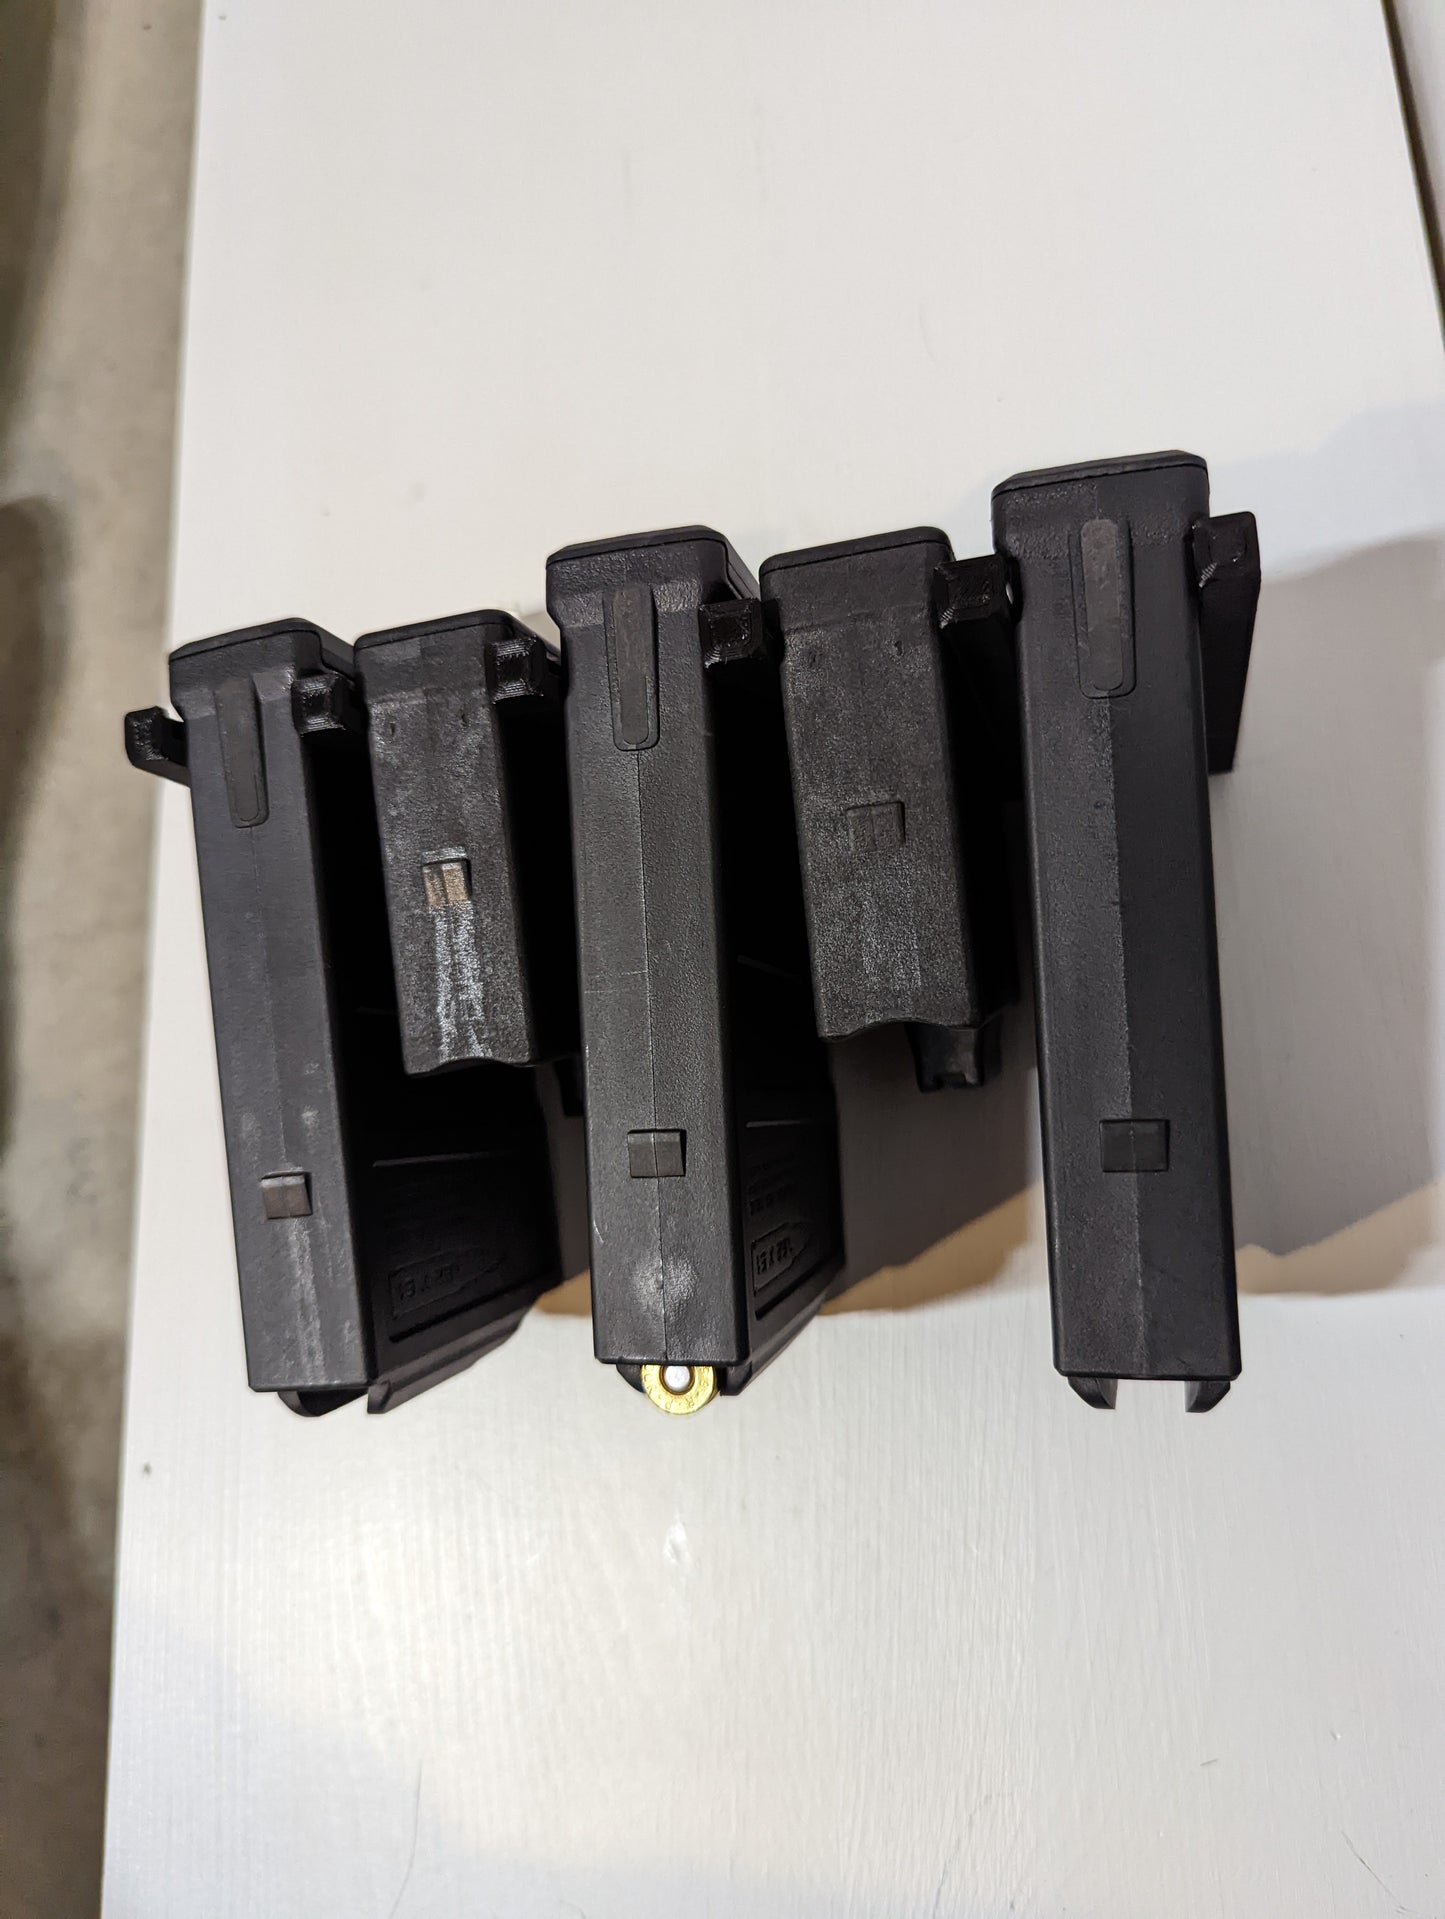 Mount for AICS Pmag 308/762 Mags - Command Strips | Magazine Holder Storage Rack